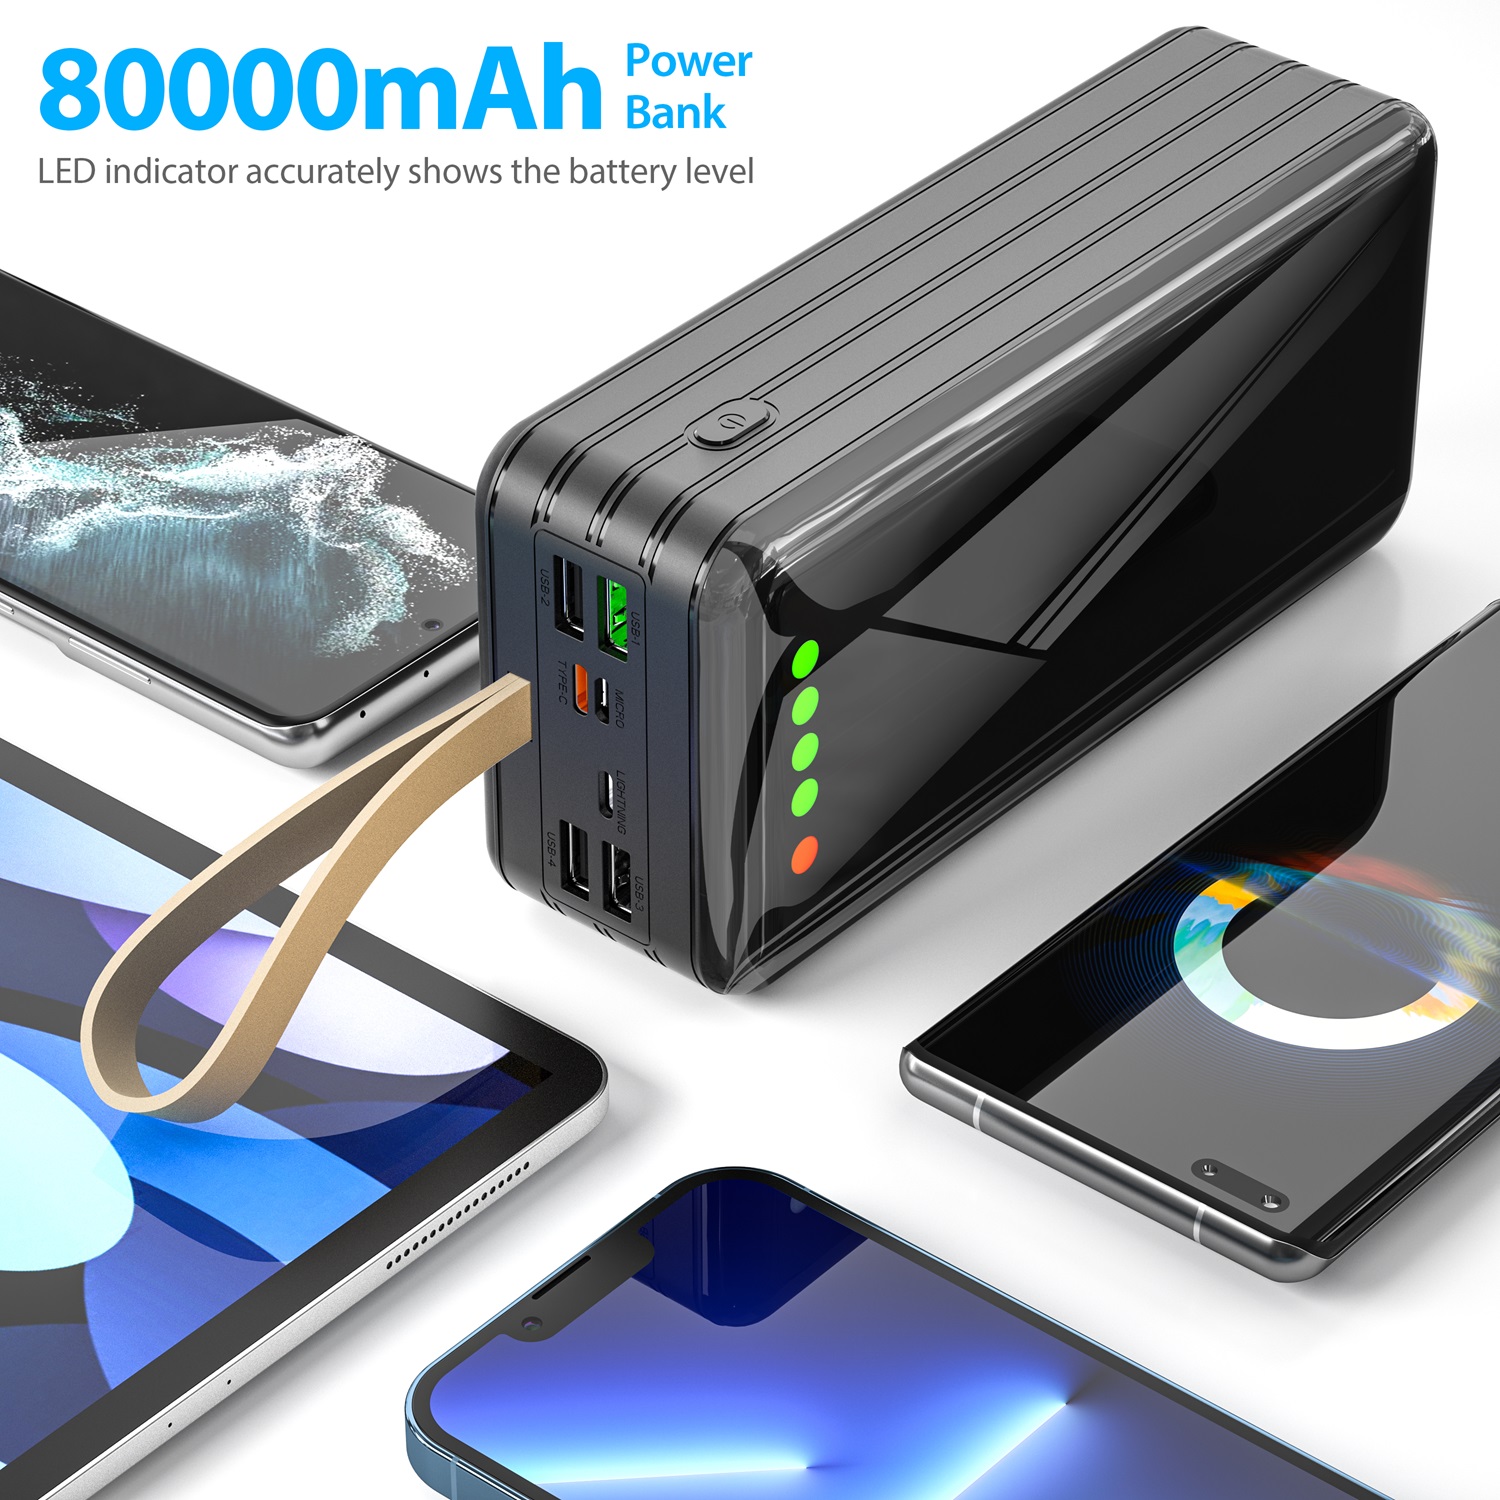 Toospon Phone Portable Charger, Power Bank - 80,000mAh QC 22.5W Power Station External Battery Pack for Outdoor Use with Fast Charging PD 20W, External Battery For iphone, ipad, Samsung, Huawei, Smartphones Speaker etc.